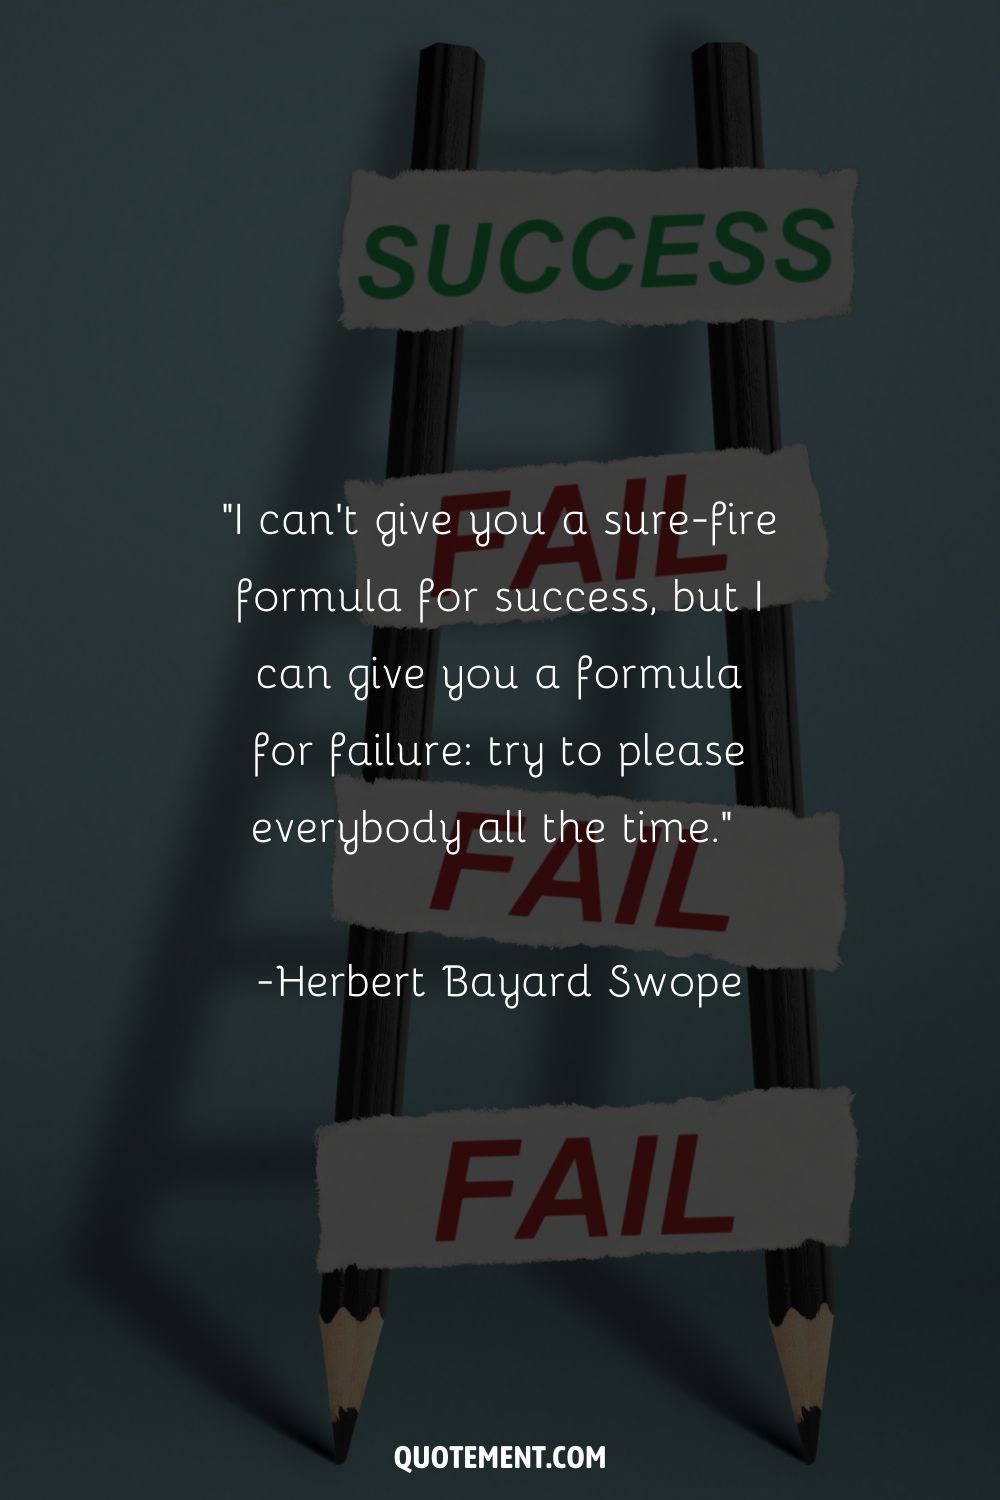 “I can't give you a sure-fire formula for success, but I can give you a formula for failure try to please everybody all the time.” ― Herbert Bayard Swope